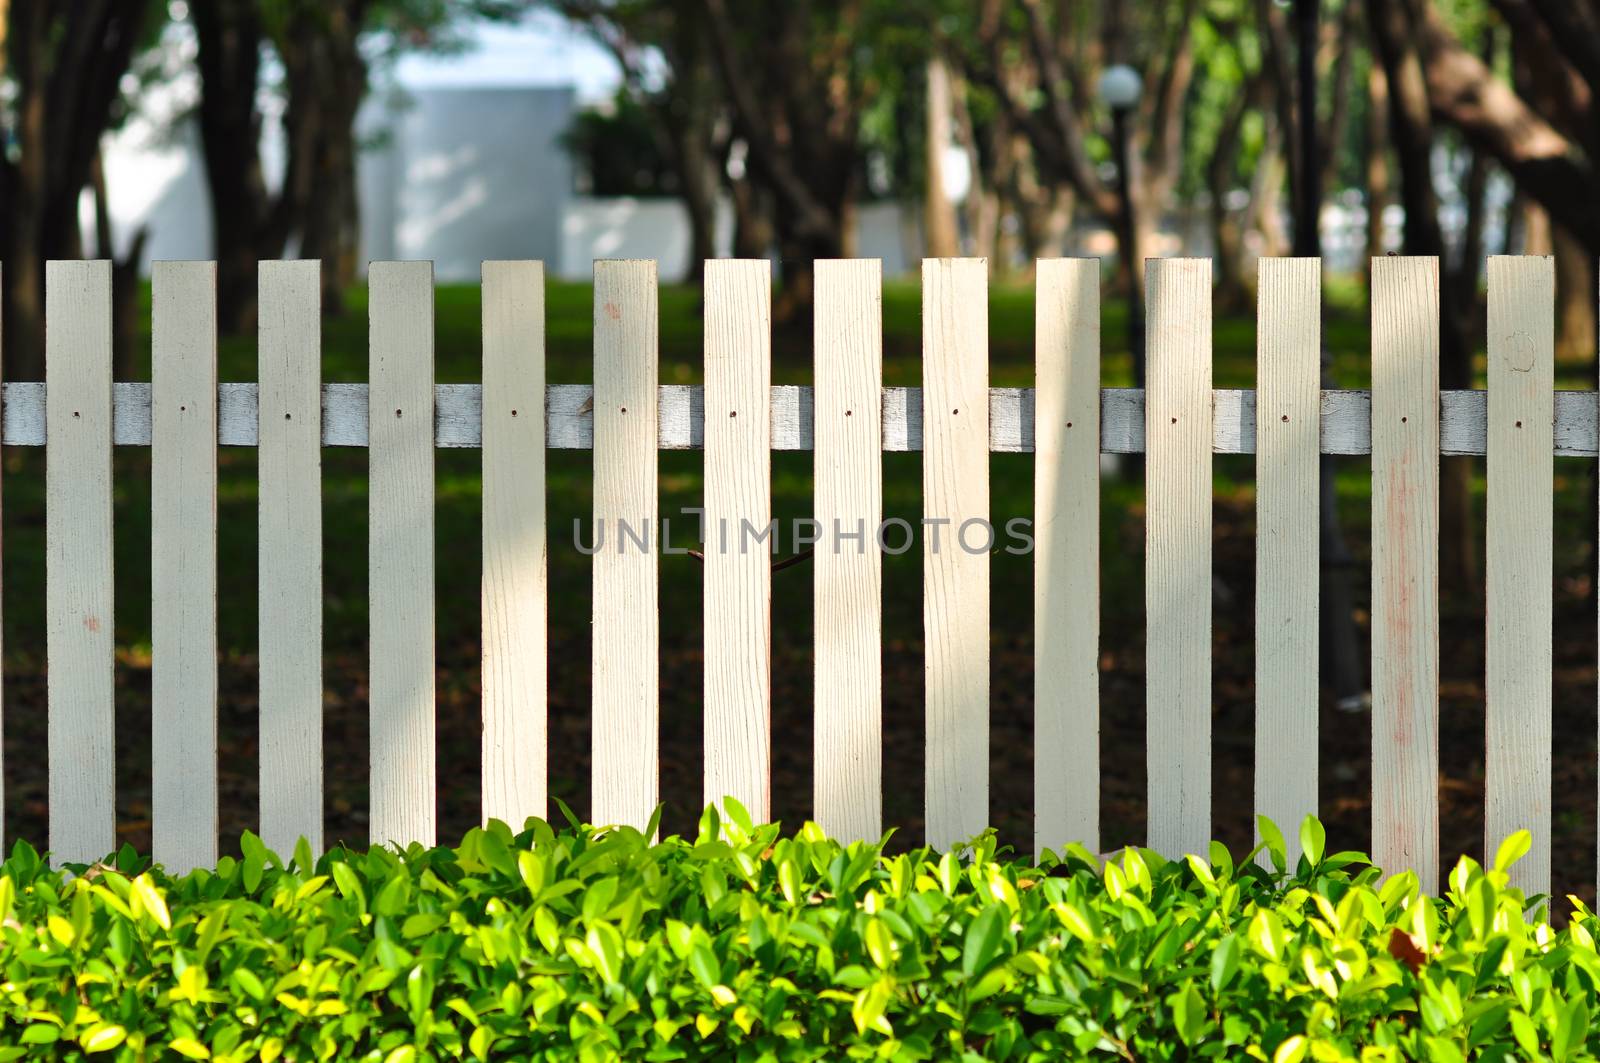 white fence in front of garden look so relax among green bush